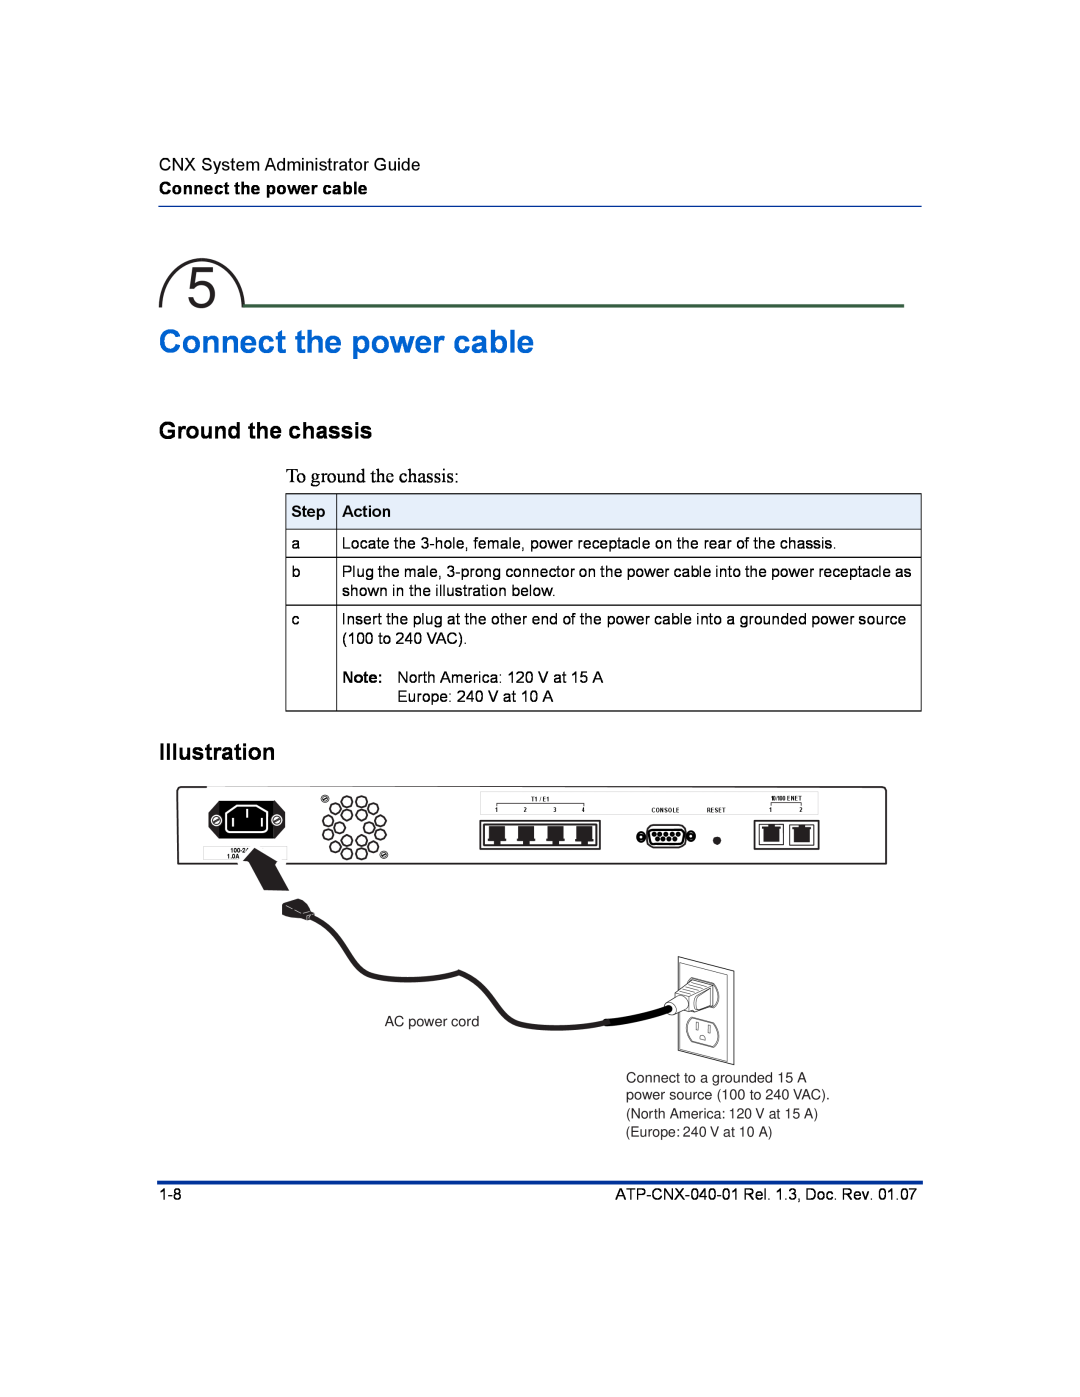 Aastra Telecom ATP-CNX-040-01 Connect the power cable, Ground the chassis, Illustration, CNX System Administrator Guide 